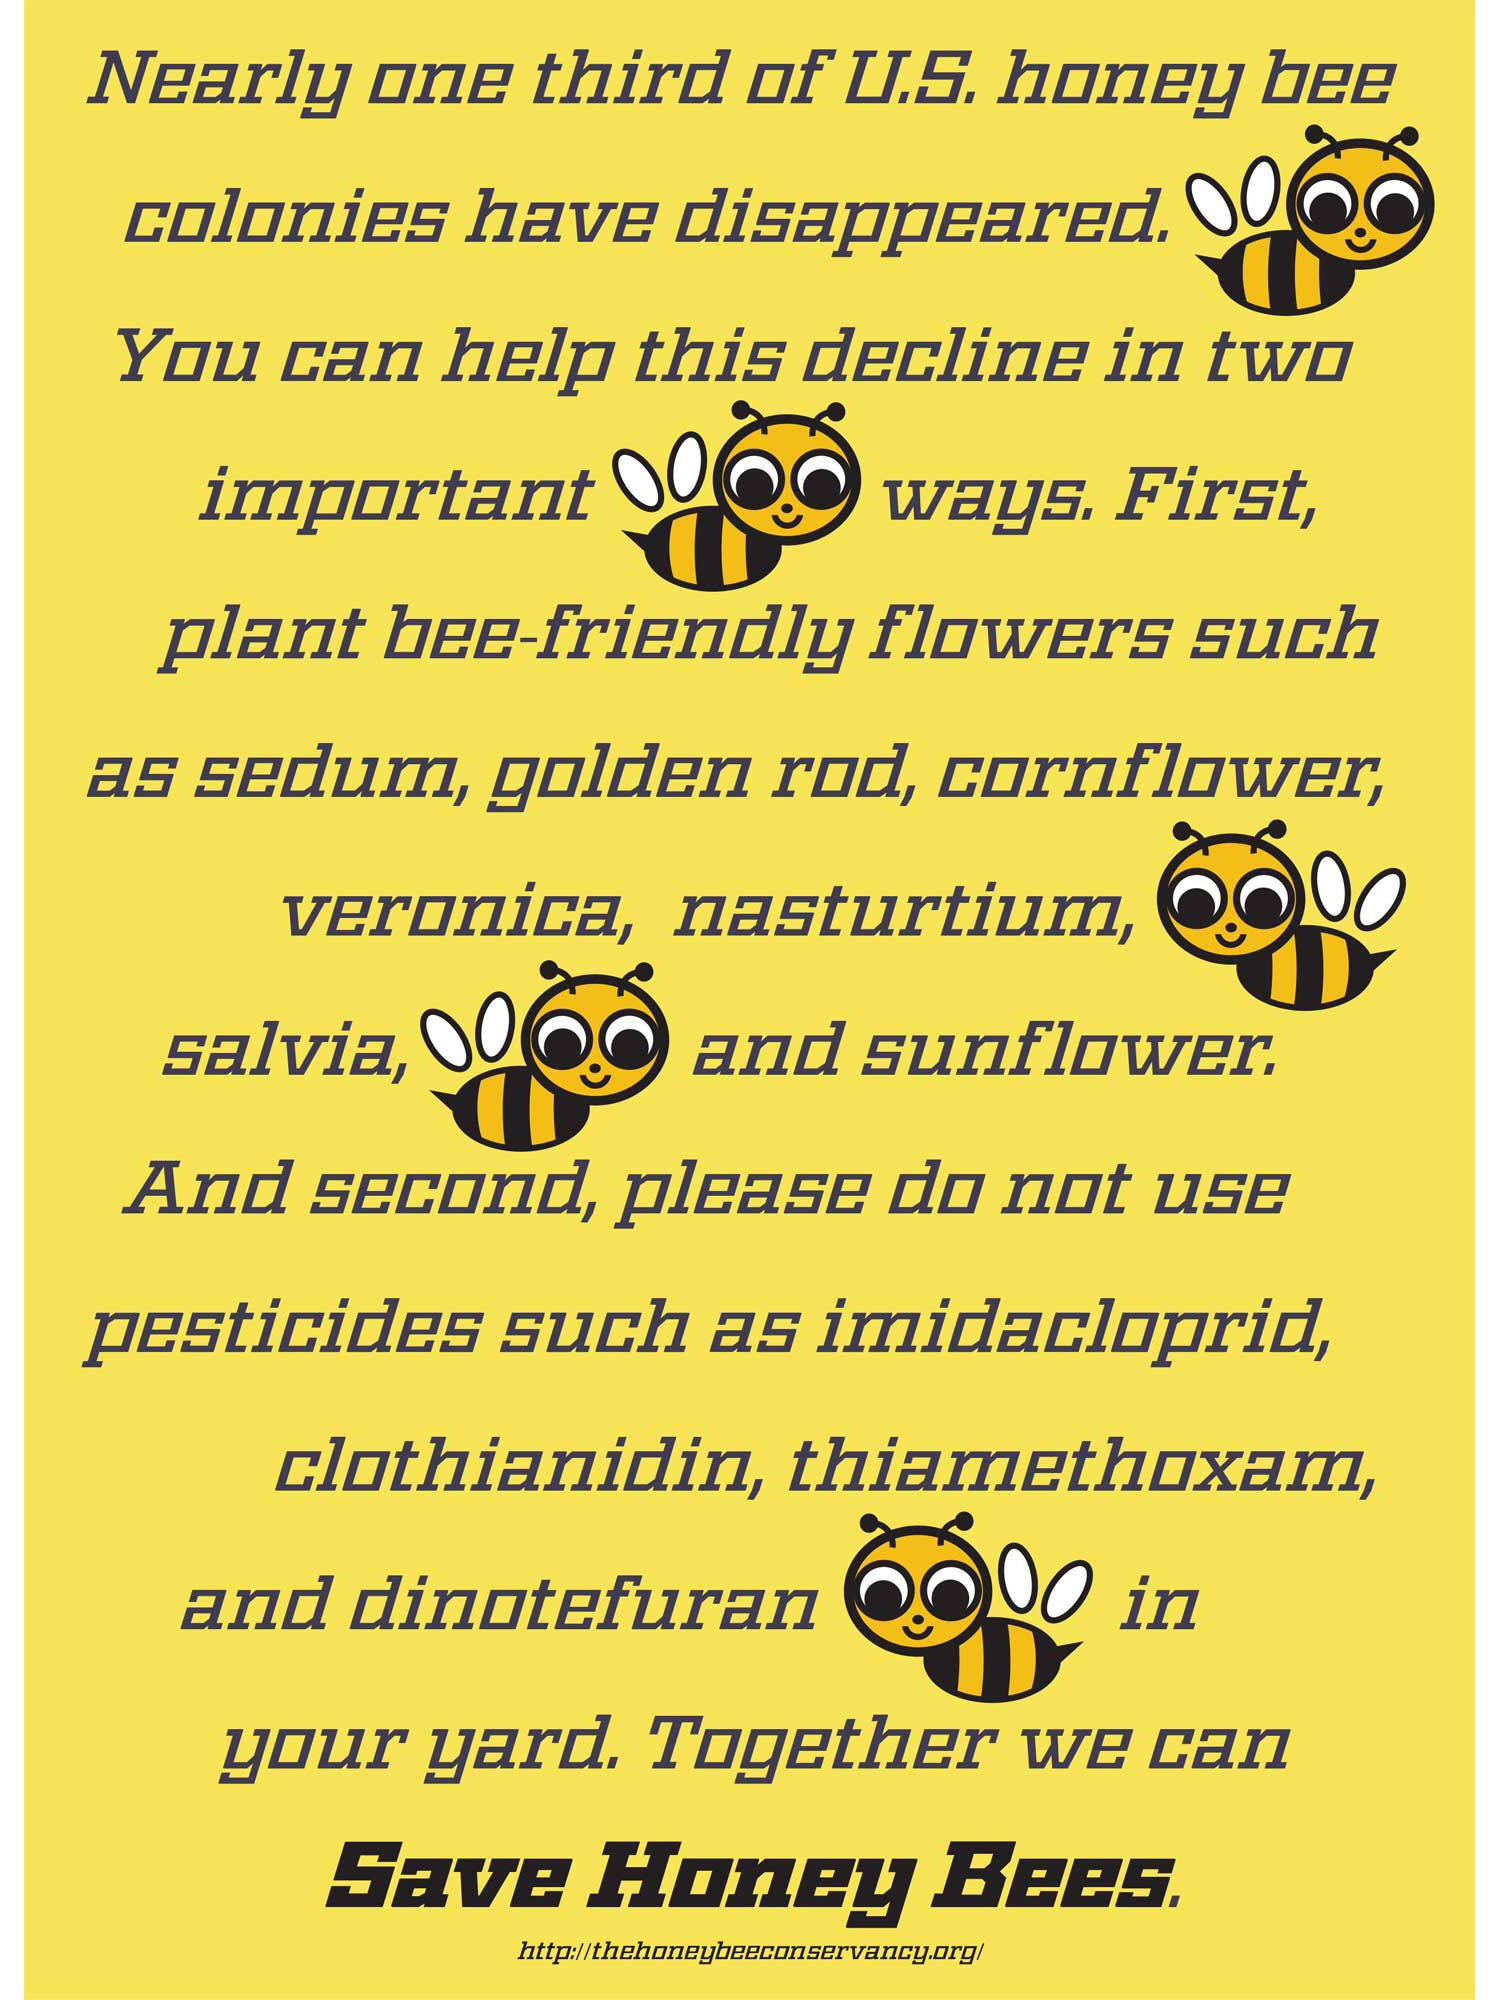 “With one out of every three bites of food eaten worldwide dependent on bee pollination, a decrease in the world bee population could result in serious consequences to the world food supply; a story I wanted to tell with my poster.”